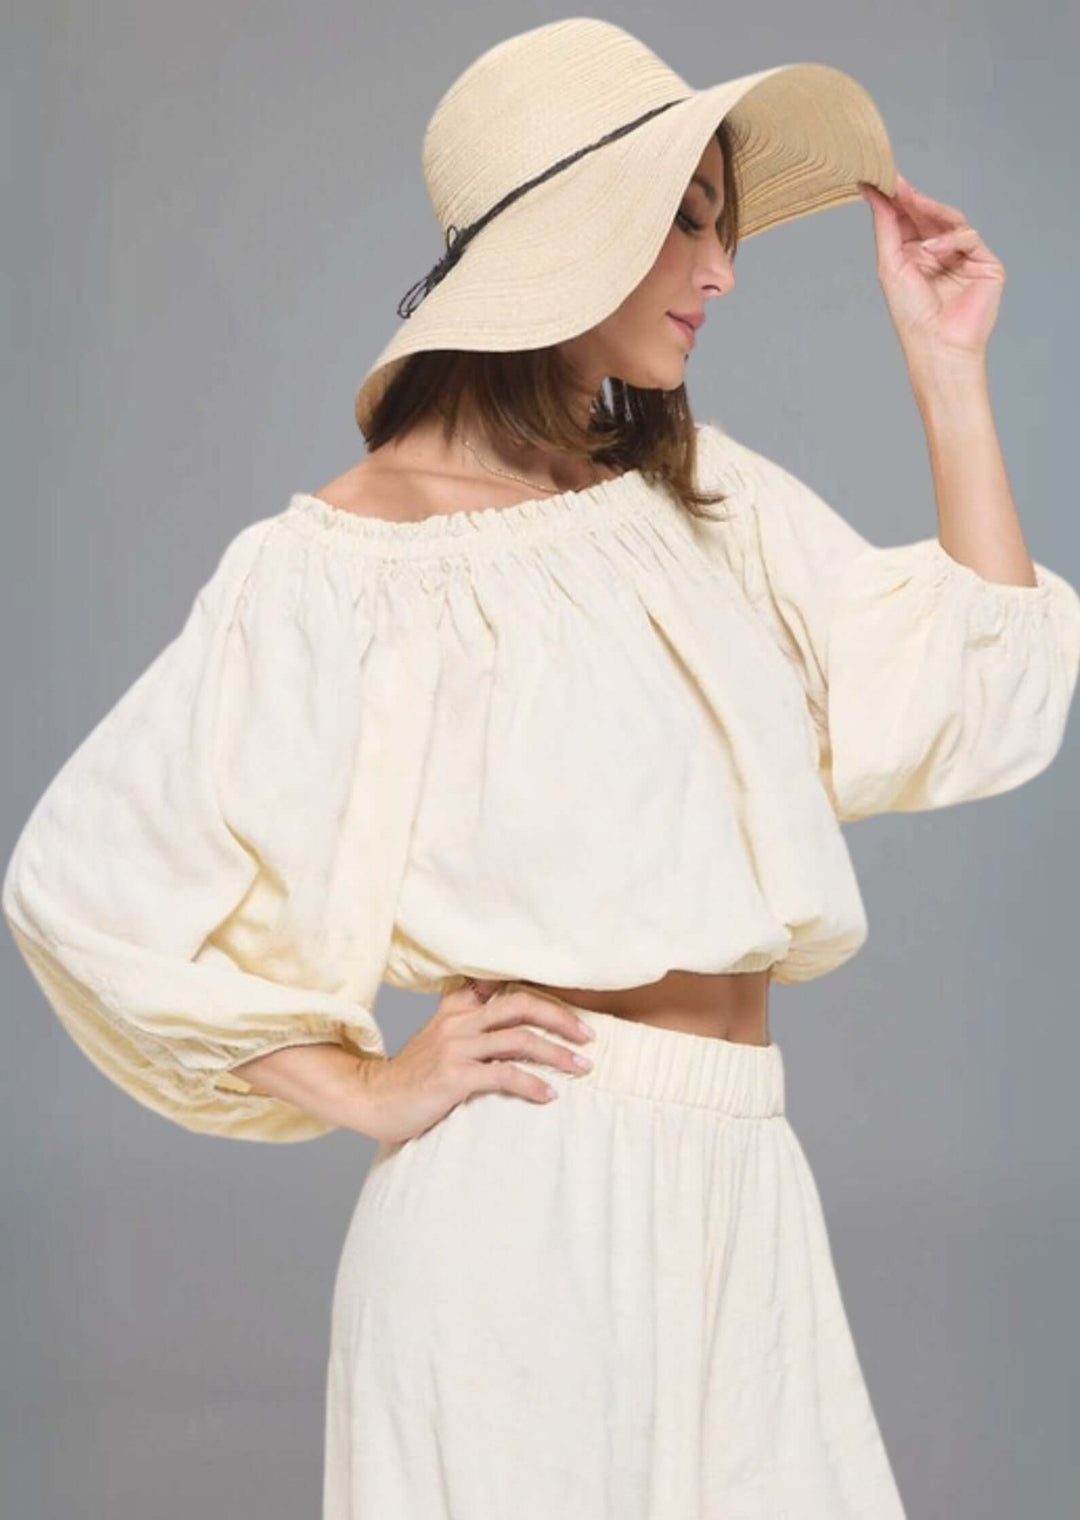 Made in USA Textured Balloon Sleeve Cropped Off the Shoulder Top in Cream with Elastic at Shoulders, Hem & Cuffs | Renee C Style 4788TP